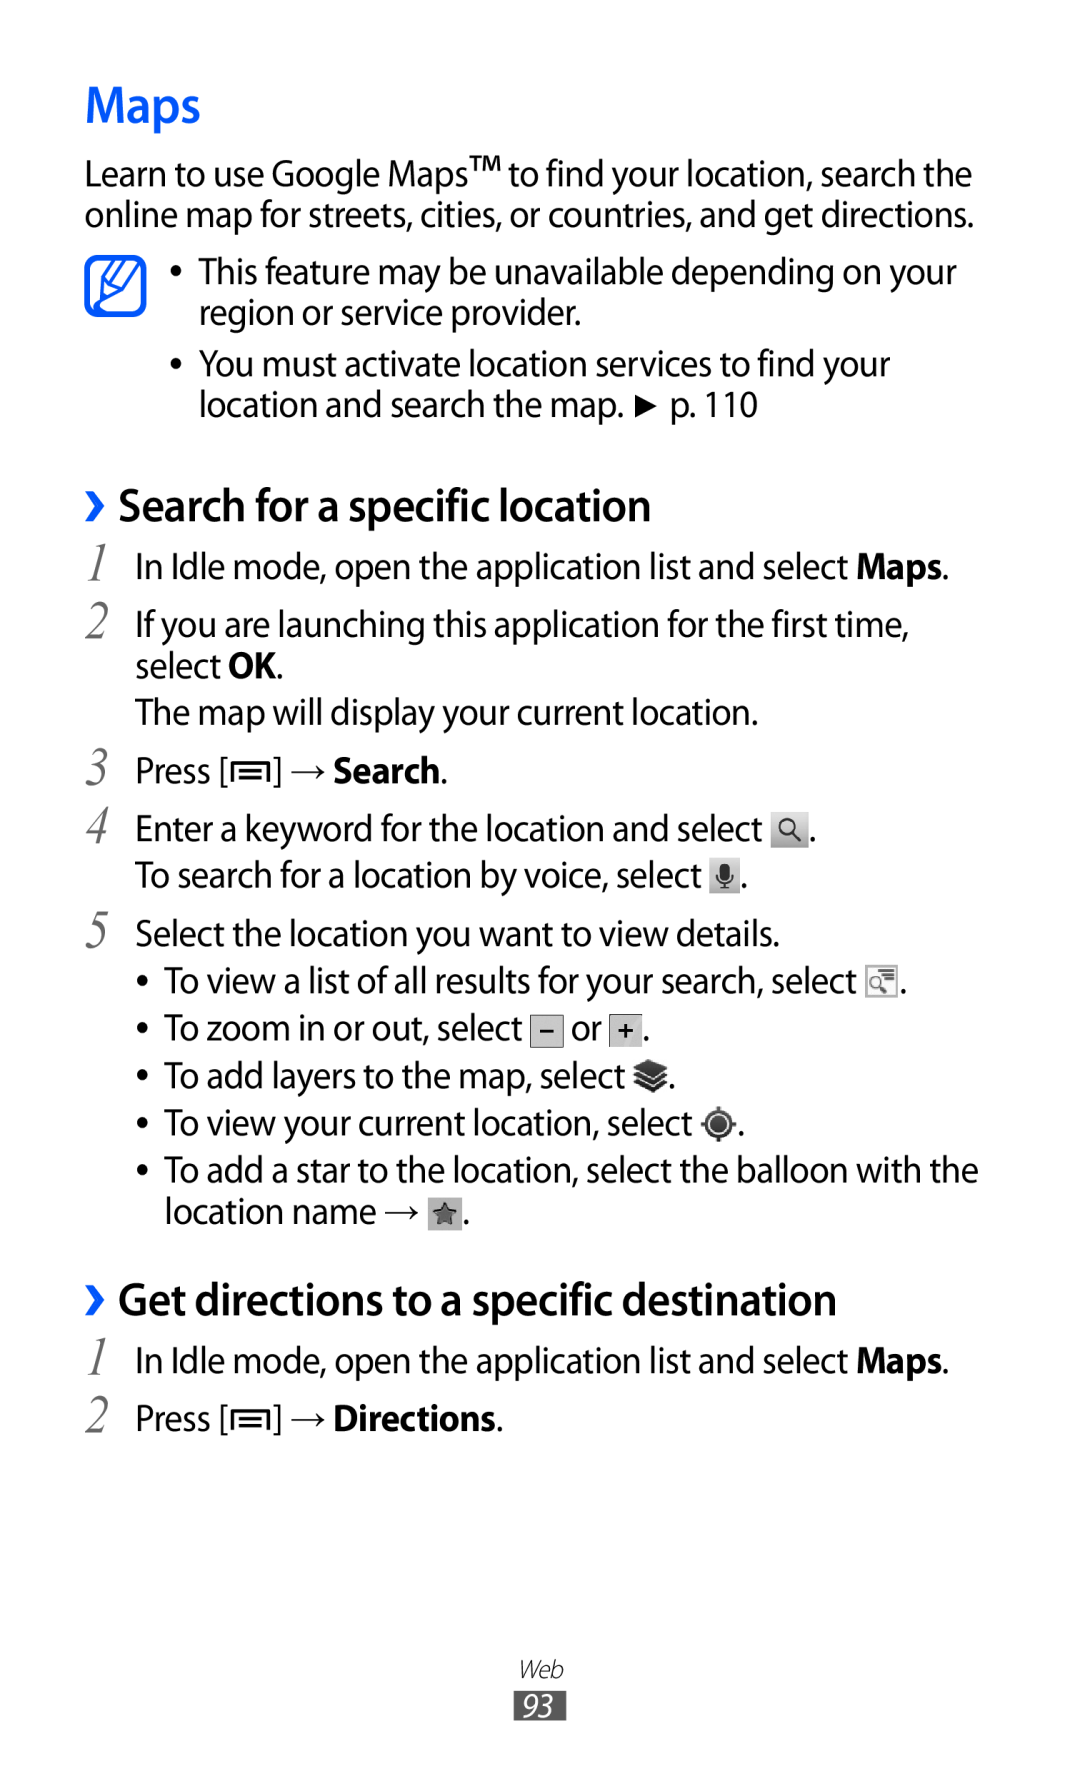 Samsung GT-I9070RWEJED, GT-I9070RWAJED Maps, ››Search for a specific location, ››Get directions to a specific destination 